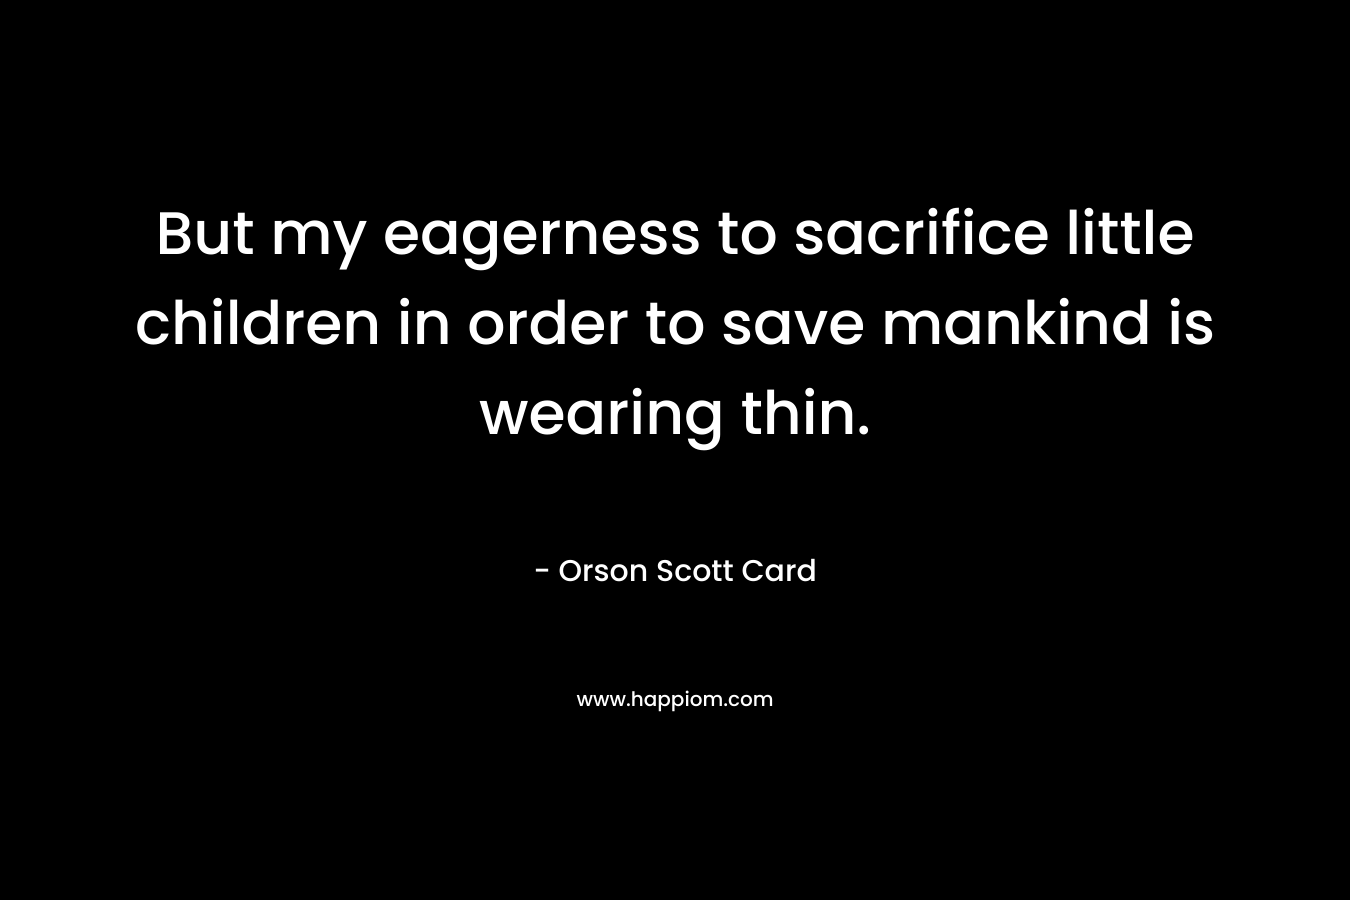 But my eagerness to sacrifice little children in order to save mankind is wearing thin. – Orson Scott Card